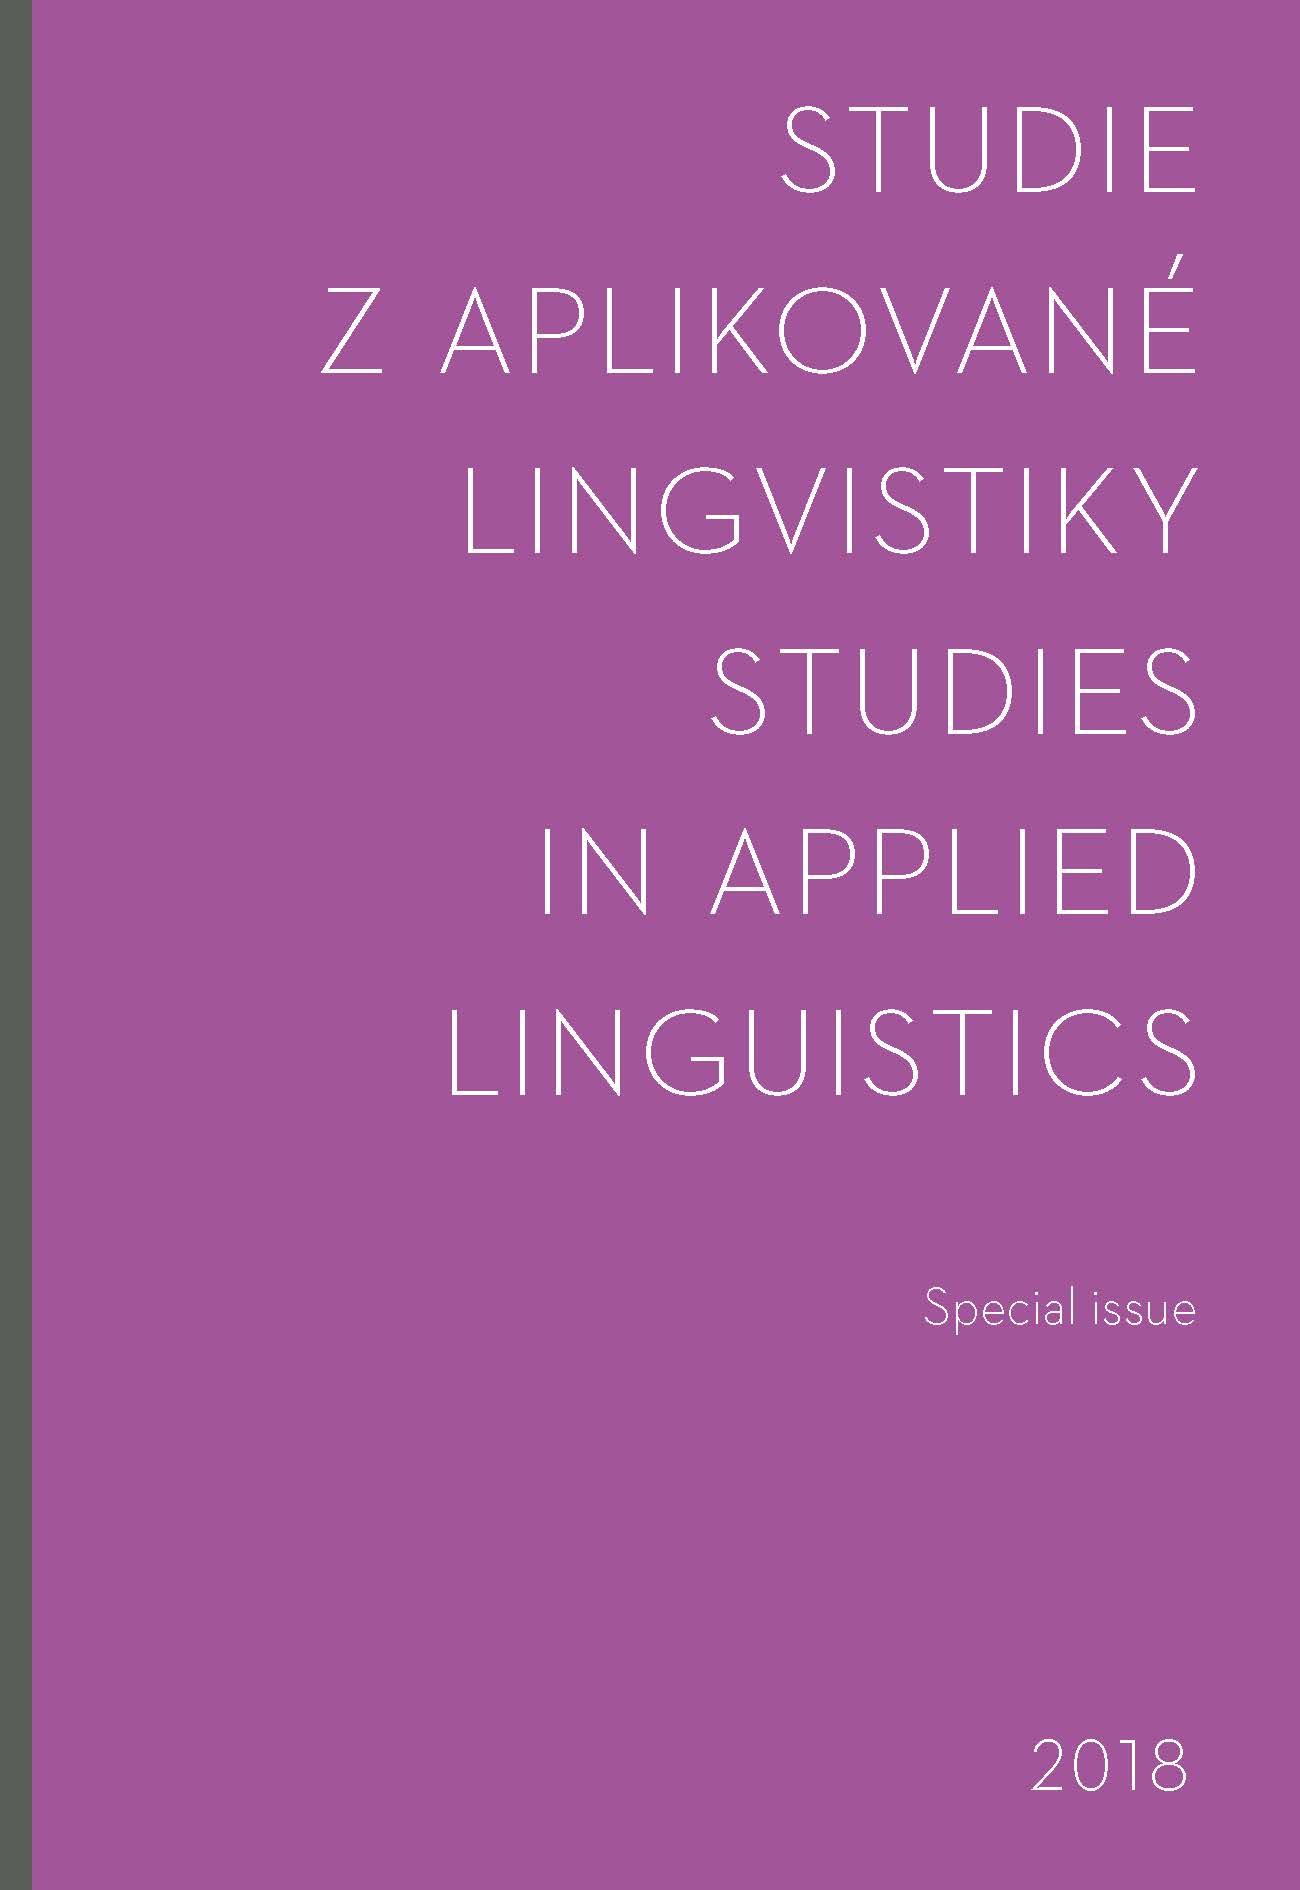 Diachronic corpus analysis: the order of Czech possesive adjectives within nominal phrase Cover Image